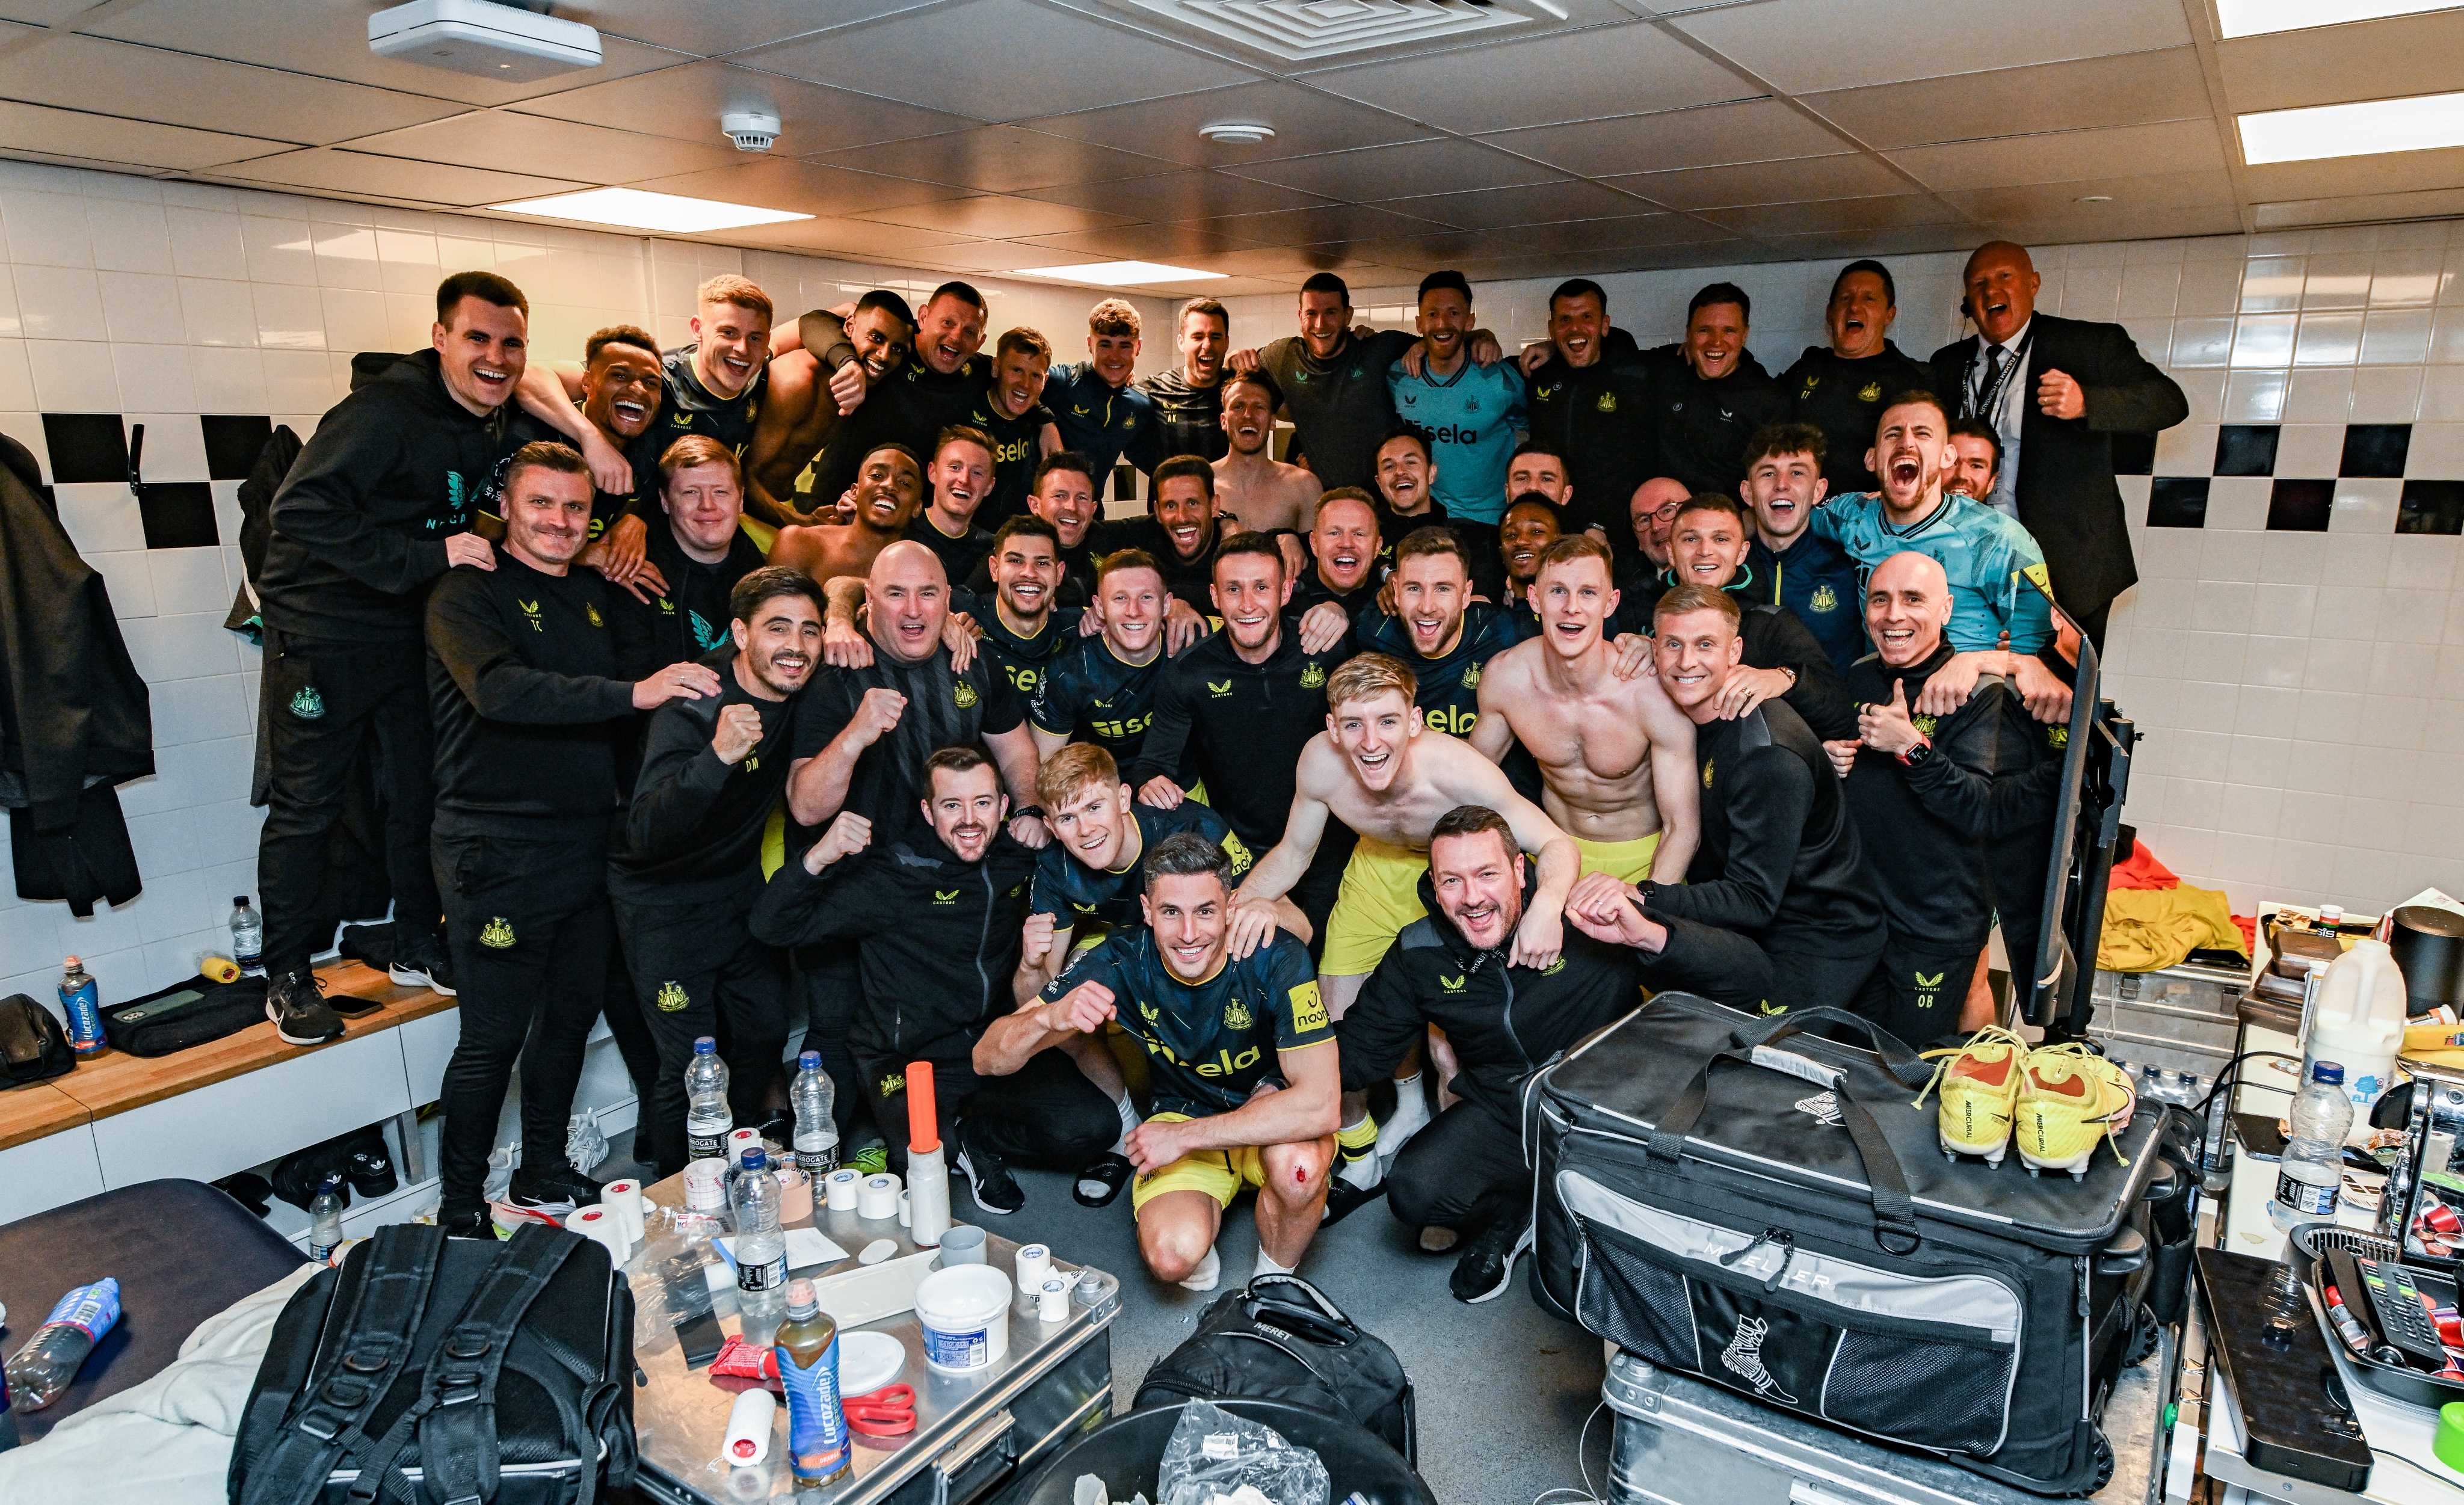 Newcastle United team photo in dressing room at Fulham after winning 1-0. 